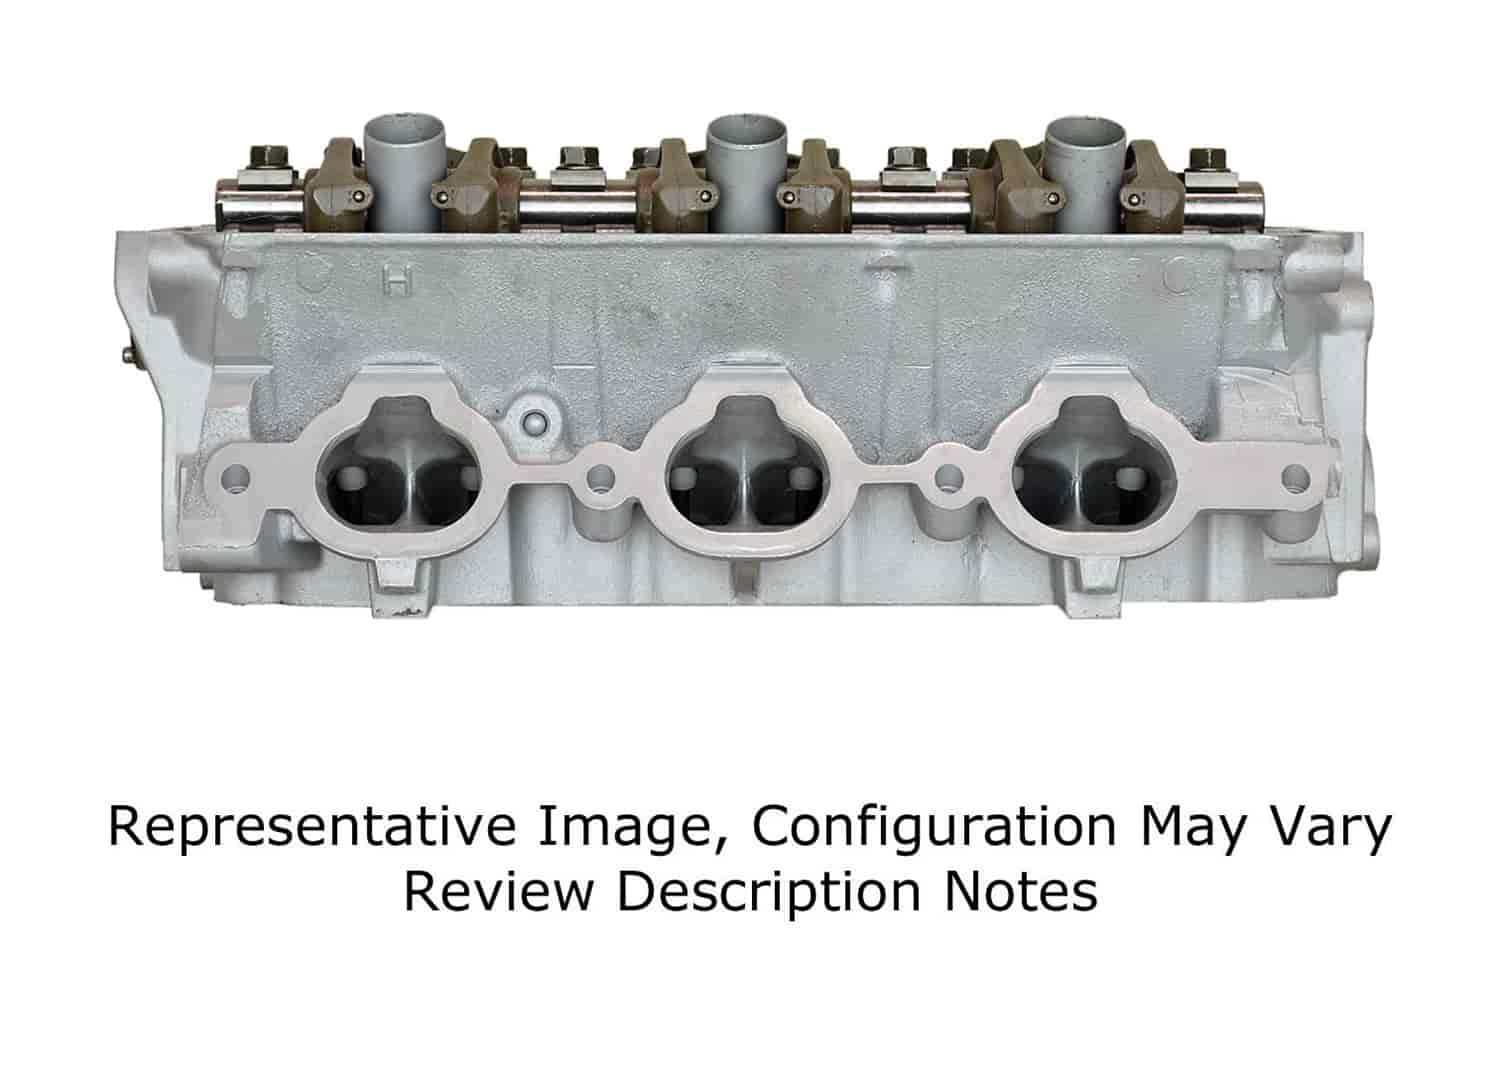 Remanufactured Cylinder Head for 2004-2011 Mitsubishi with 3.8L V6 6G75